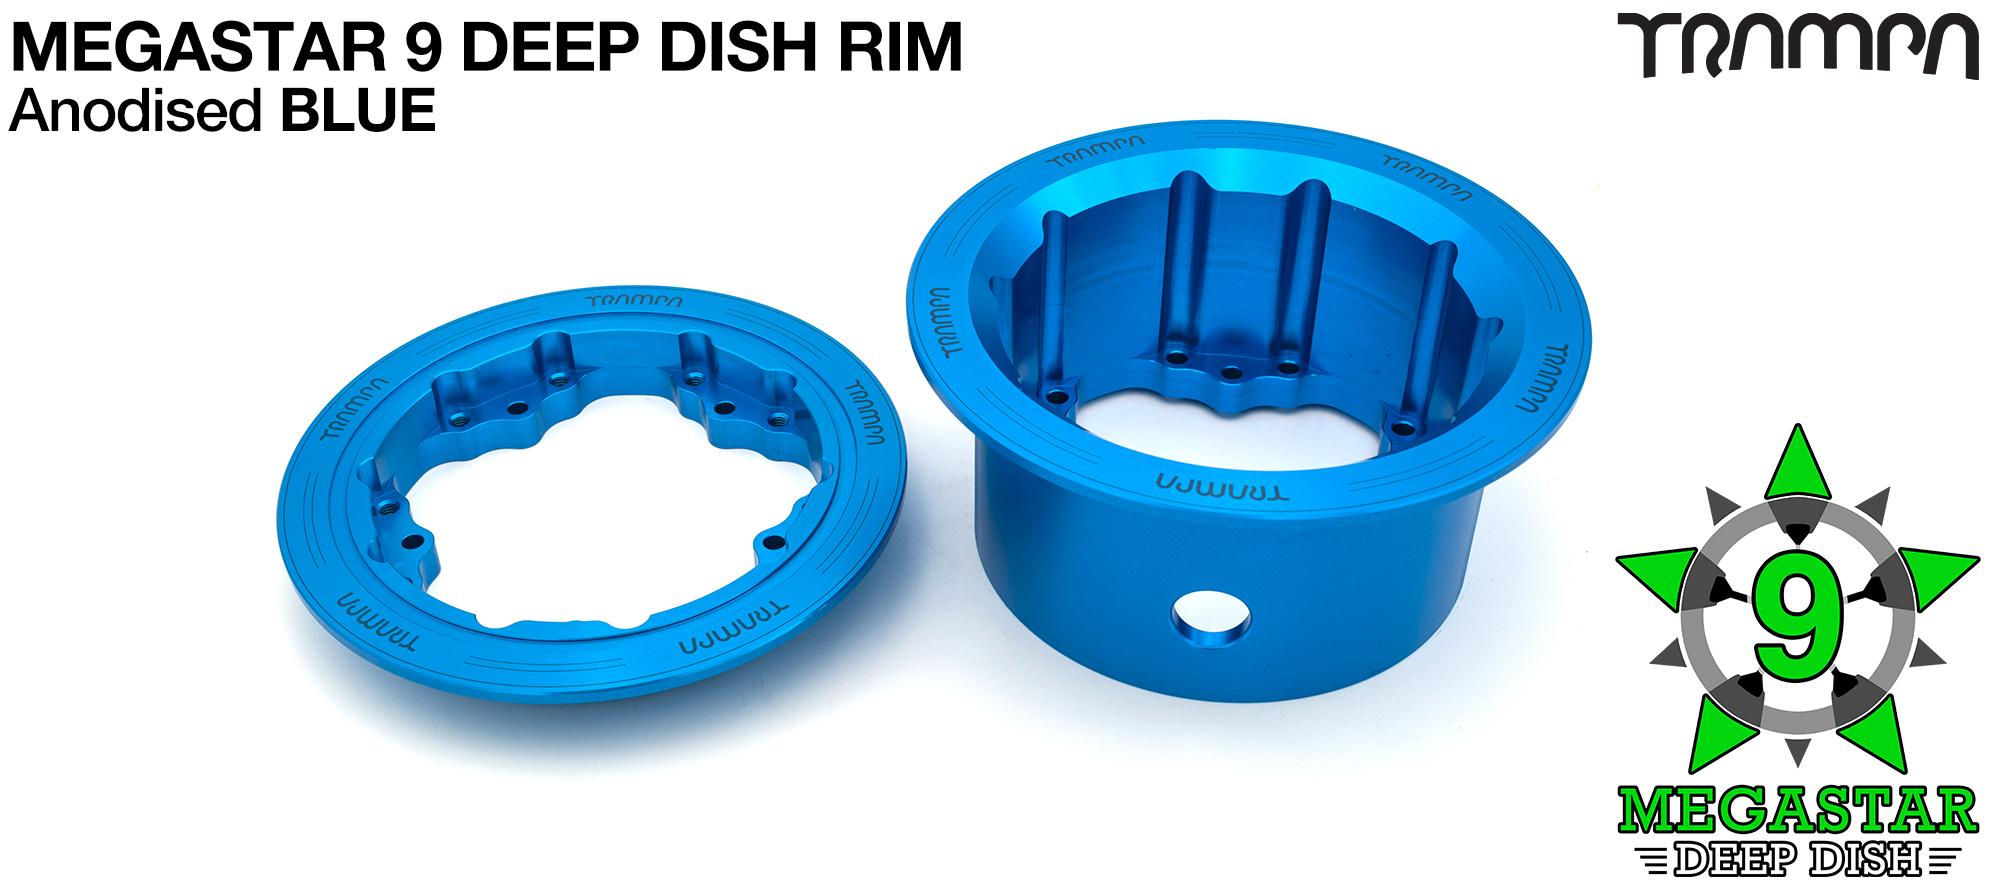 MEGASTAR 9 DD Rims Measure 3.75/4x 3 Inch. The Bearings are positioned DEEP-DISH OFF-SET & accept 3.75 & 4 Inch Rim Tyres - BLUE